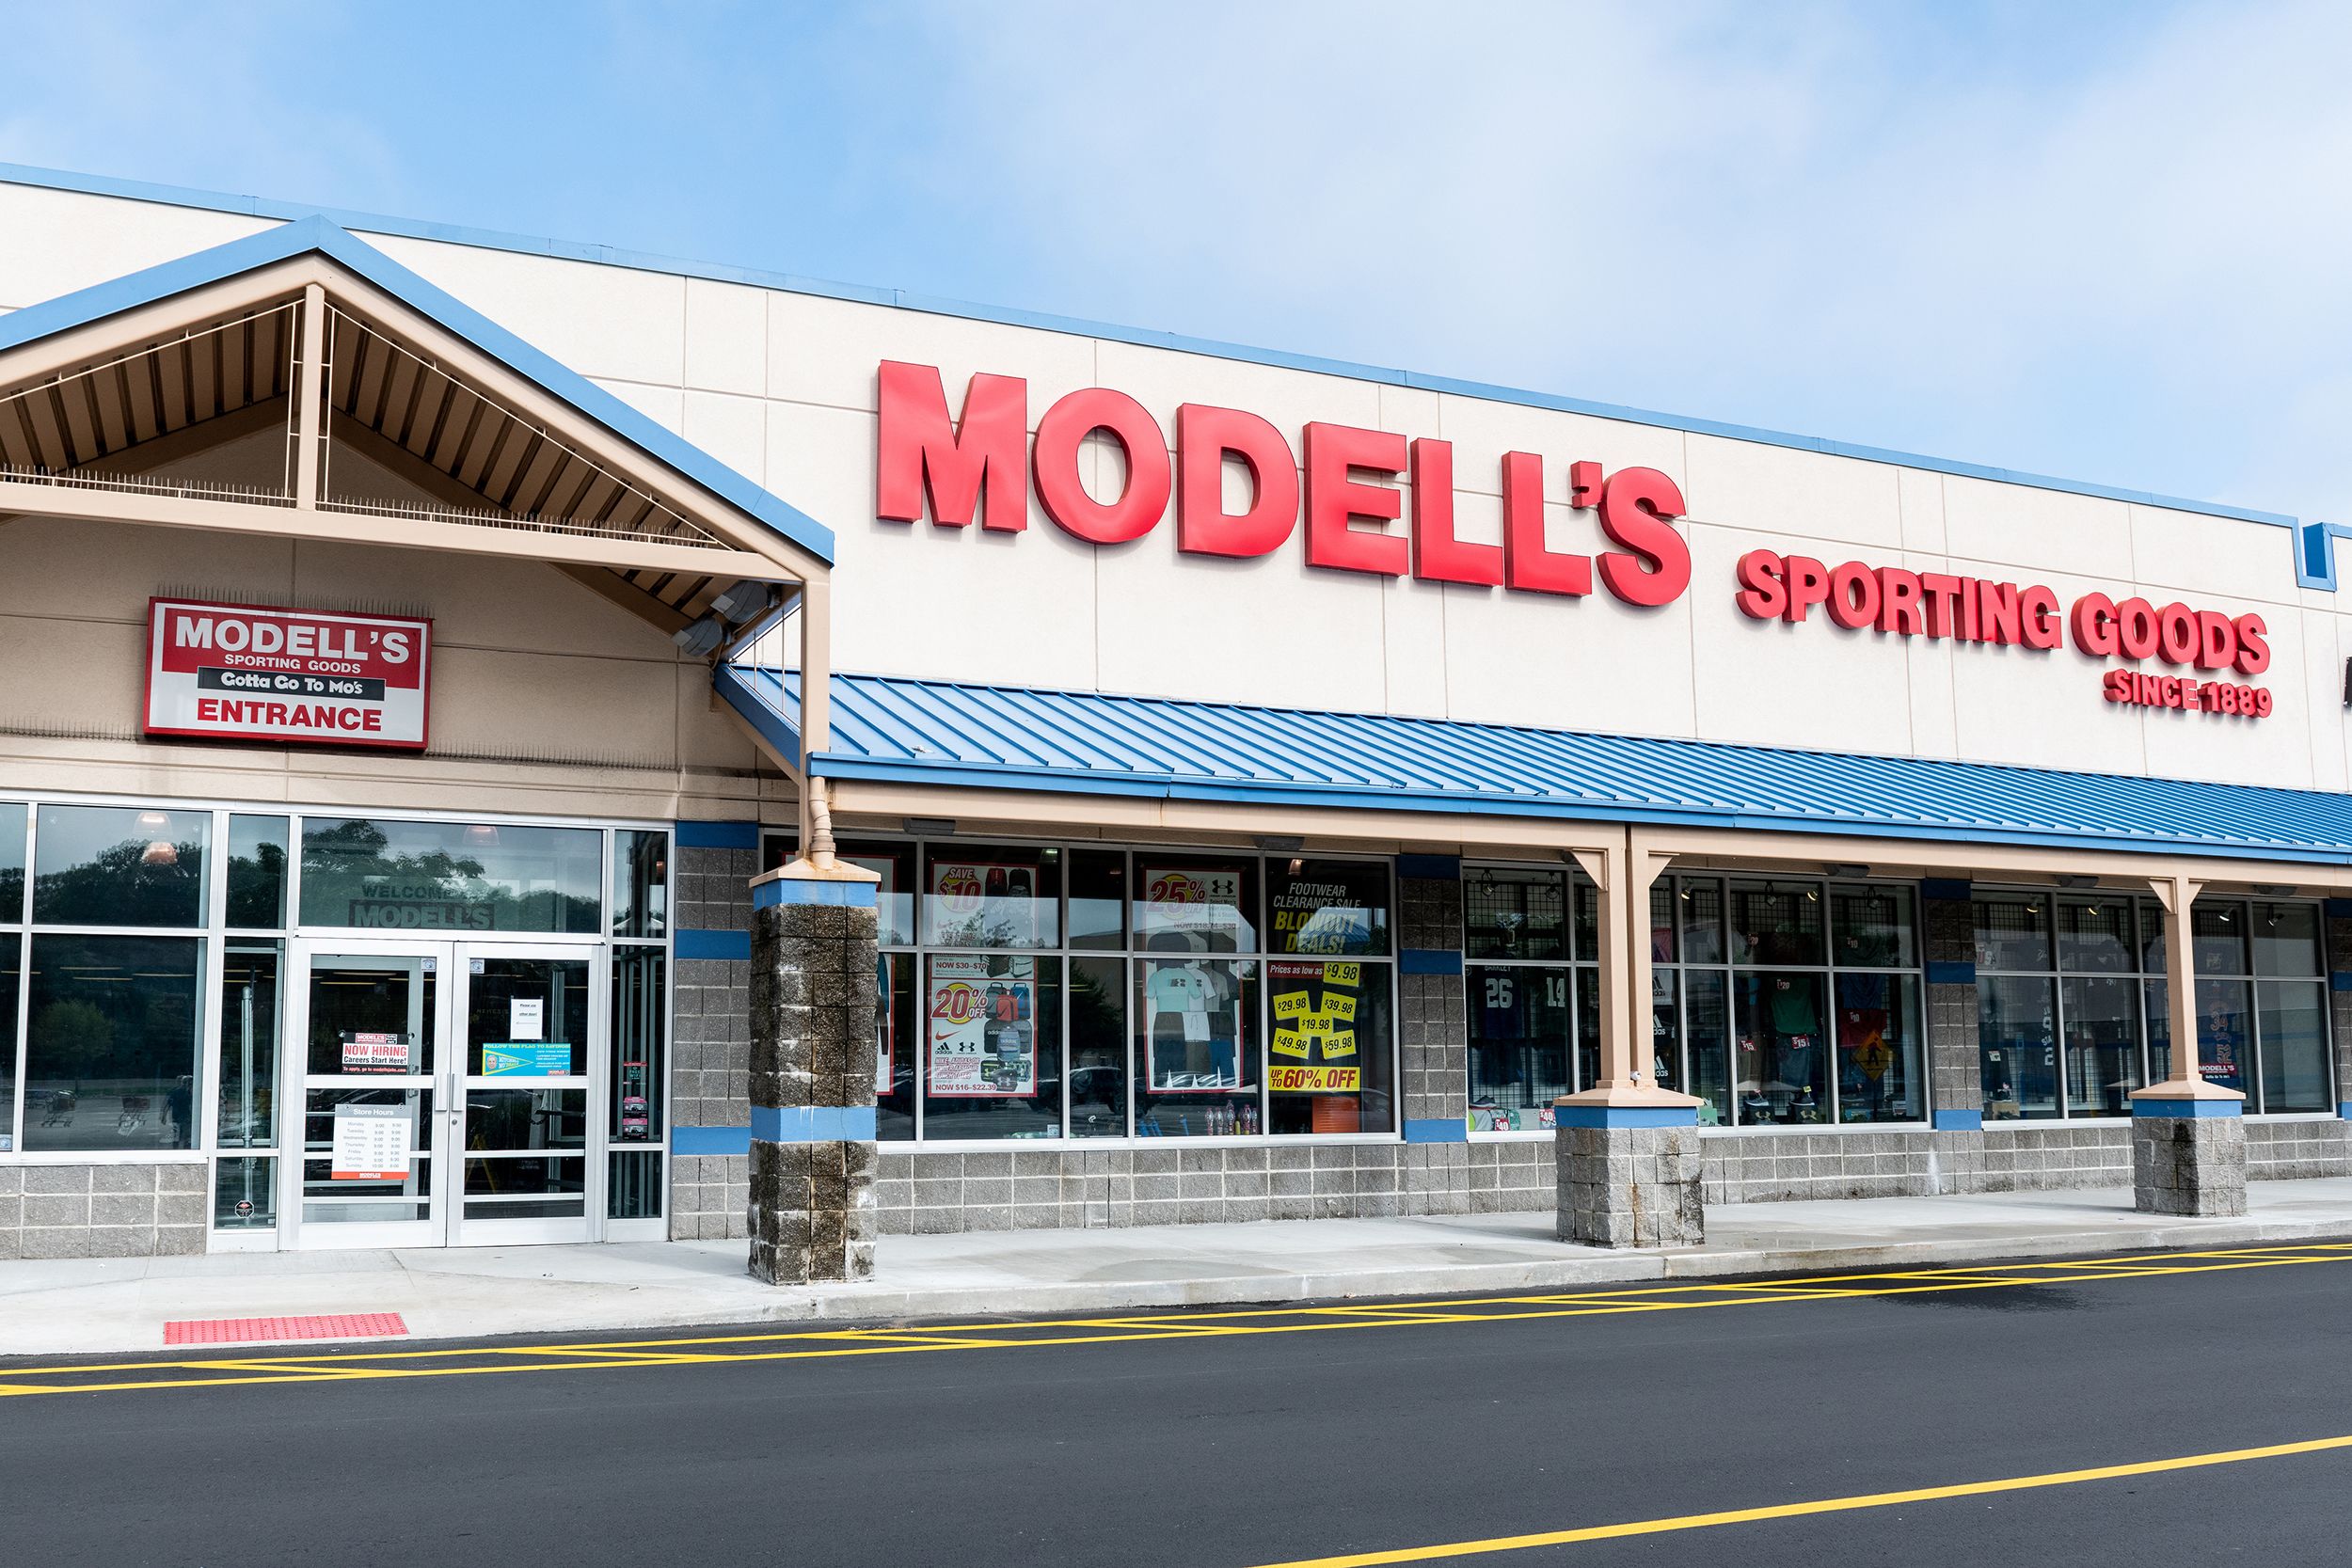 Modell's, filing for bankruptcy, will close all its stores